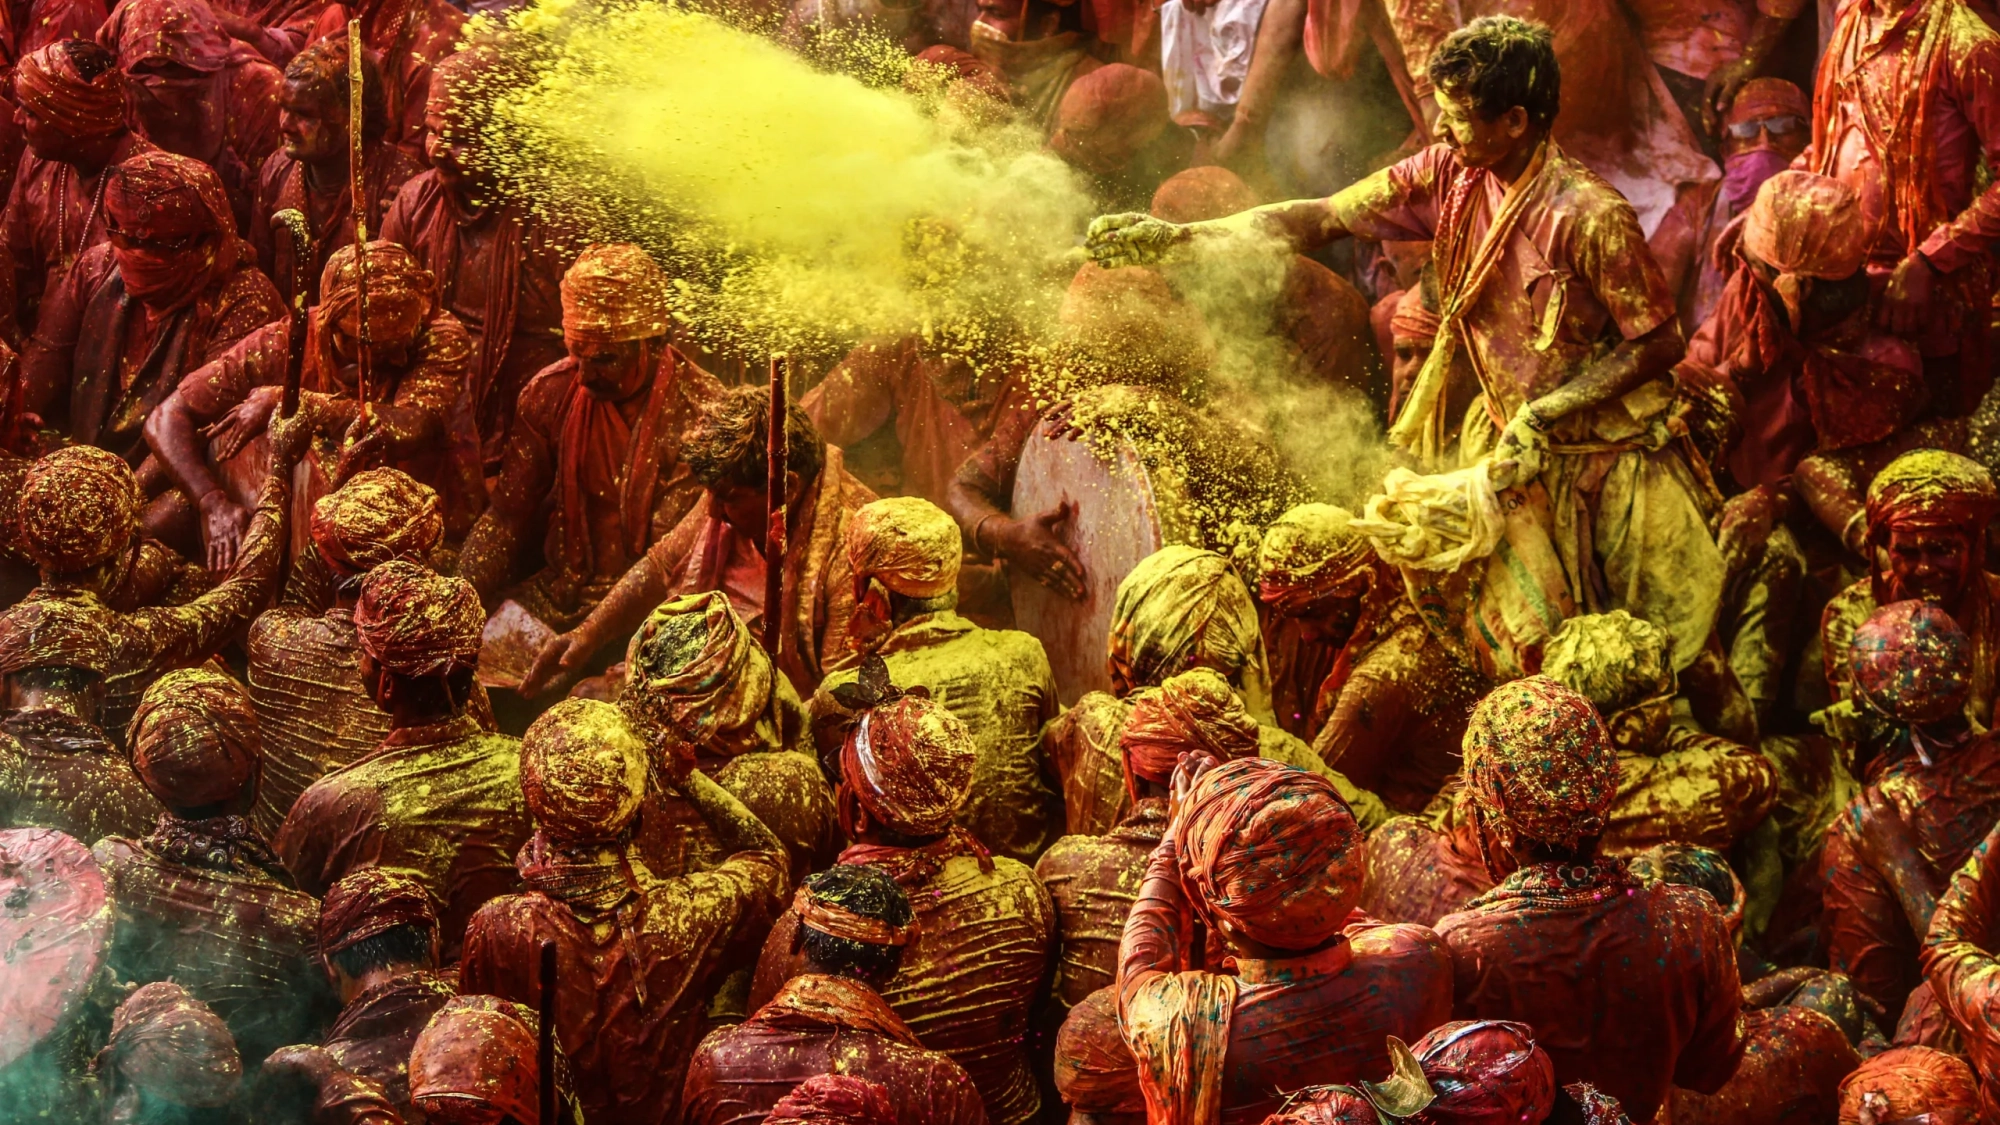 A group of people throwing colored powder during Holi celebration